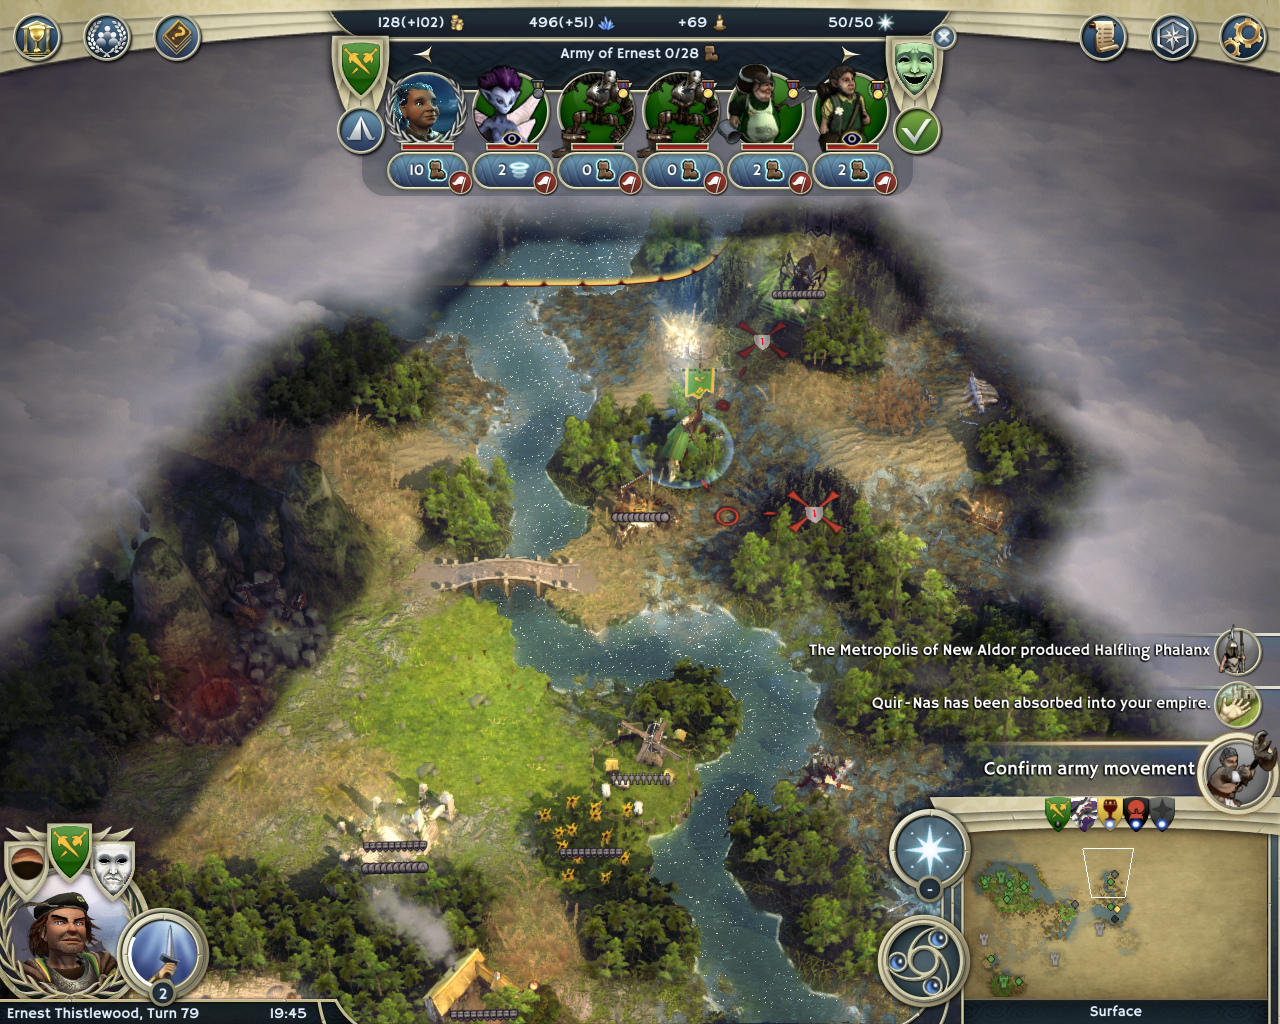 age of wonders 3 golden realms review